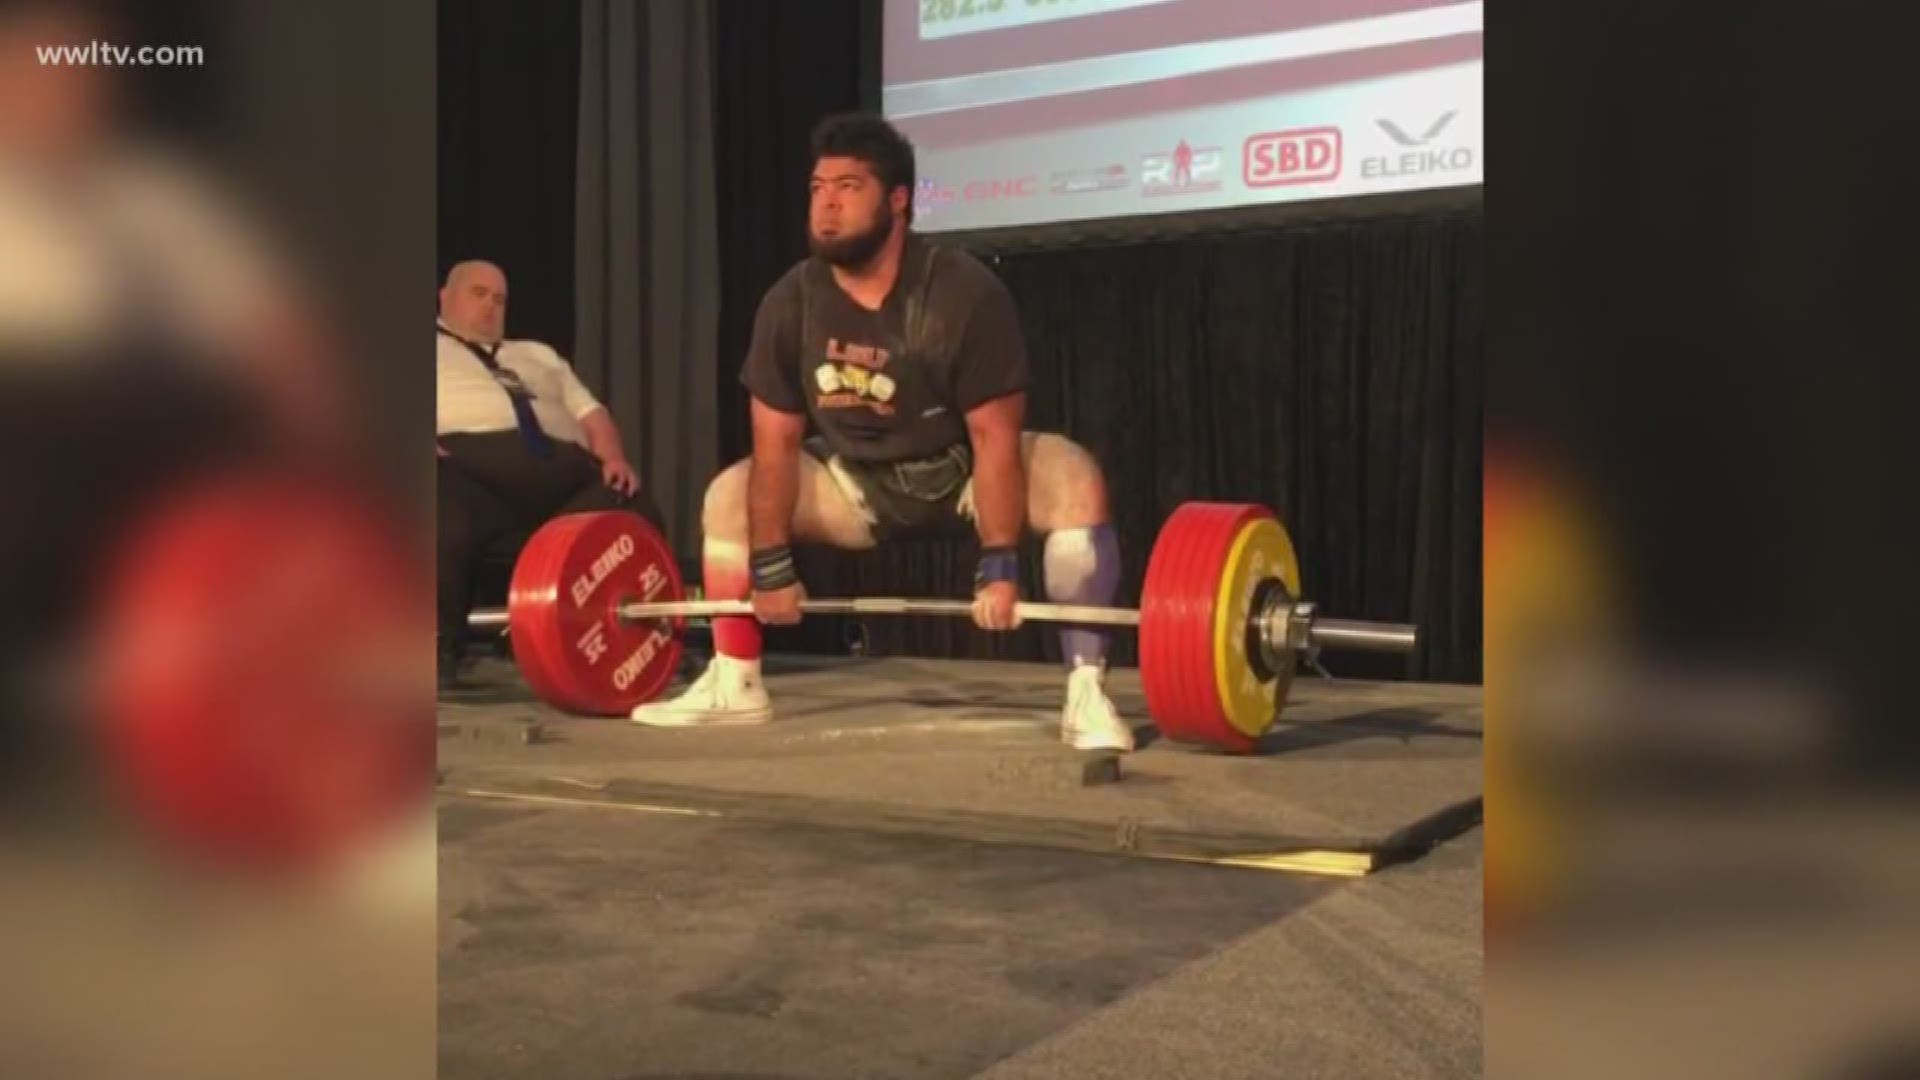 Dylon cook is an LSU power lifter who attended Northlake Christian High School.